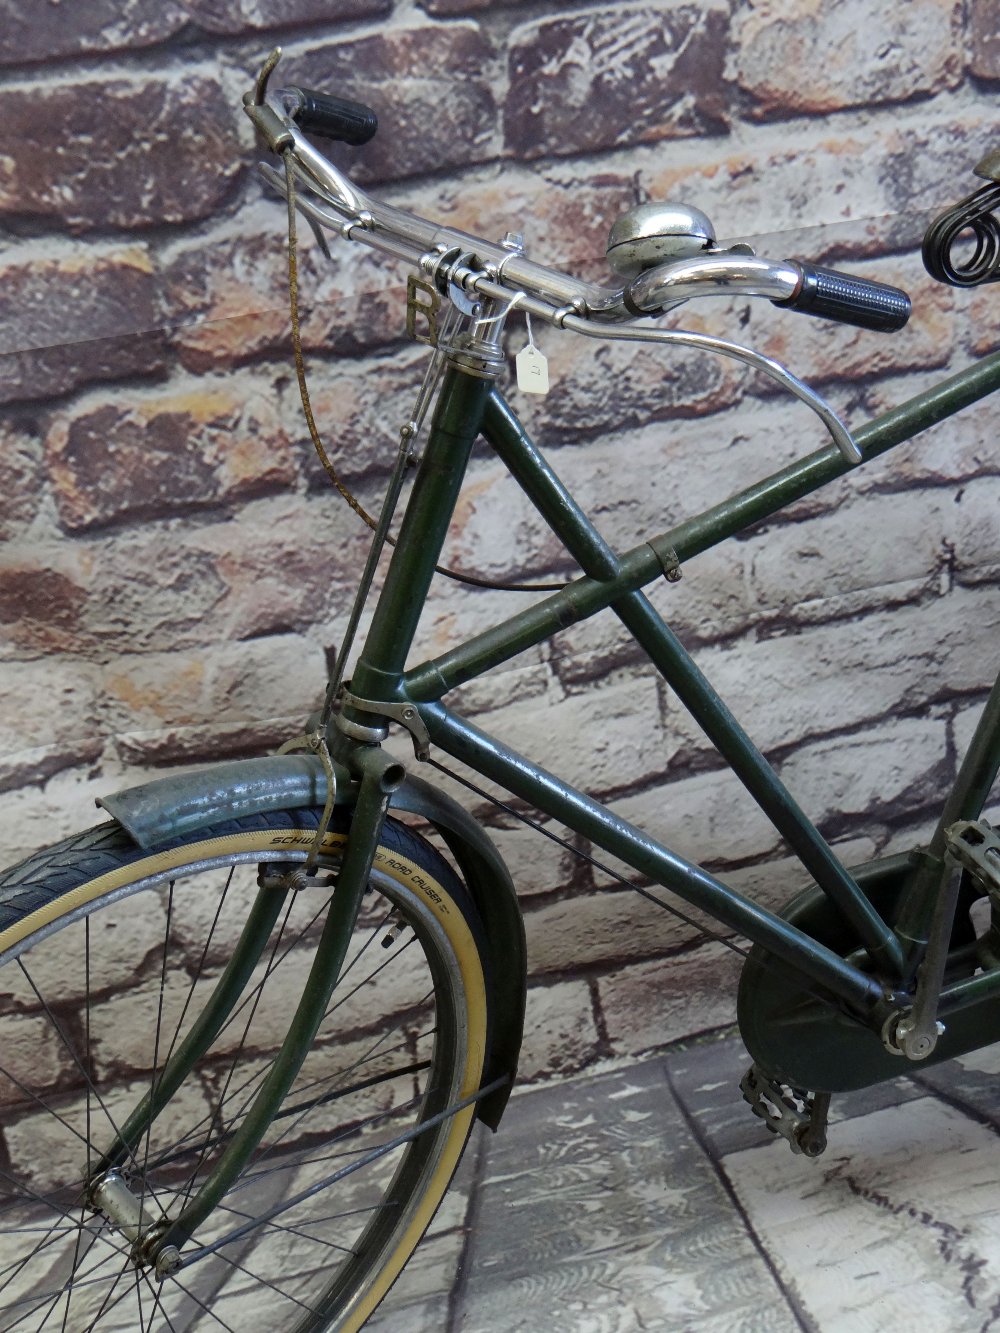 RALEIGH CROSS-FRAME ROADSTER BICYCLE, green 26" frame with 3-speed rear hub gears, centre pull - Image 3 of 3